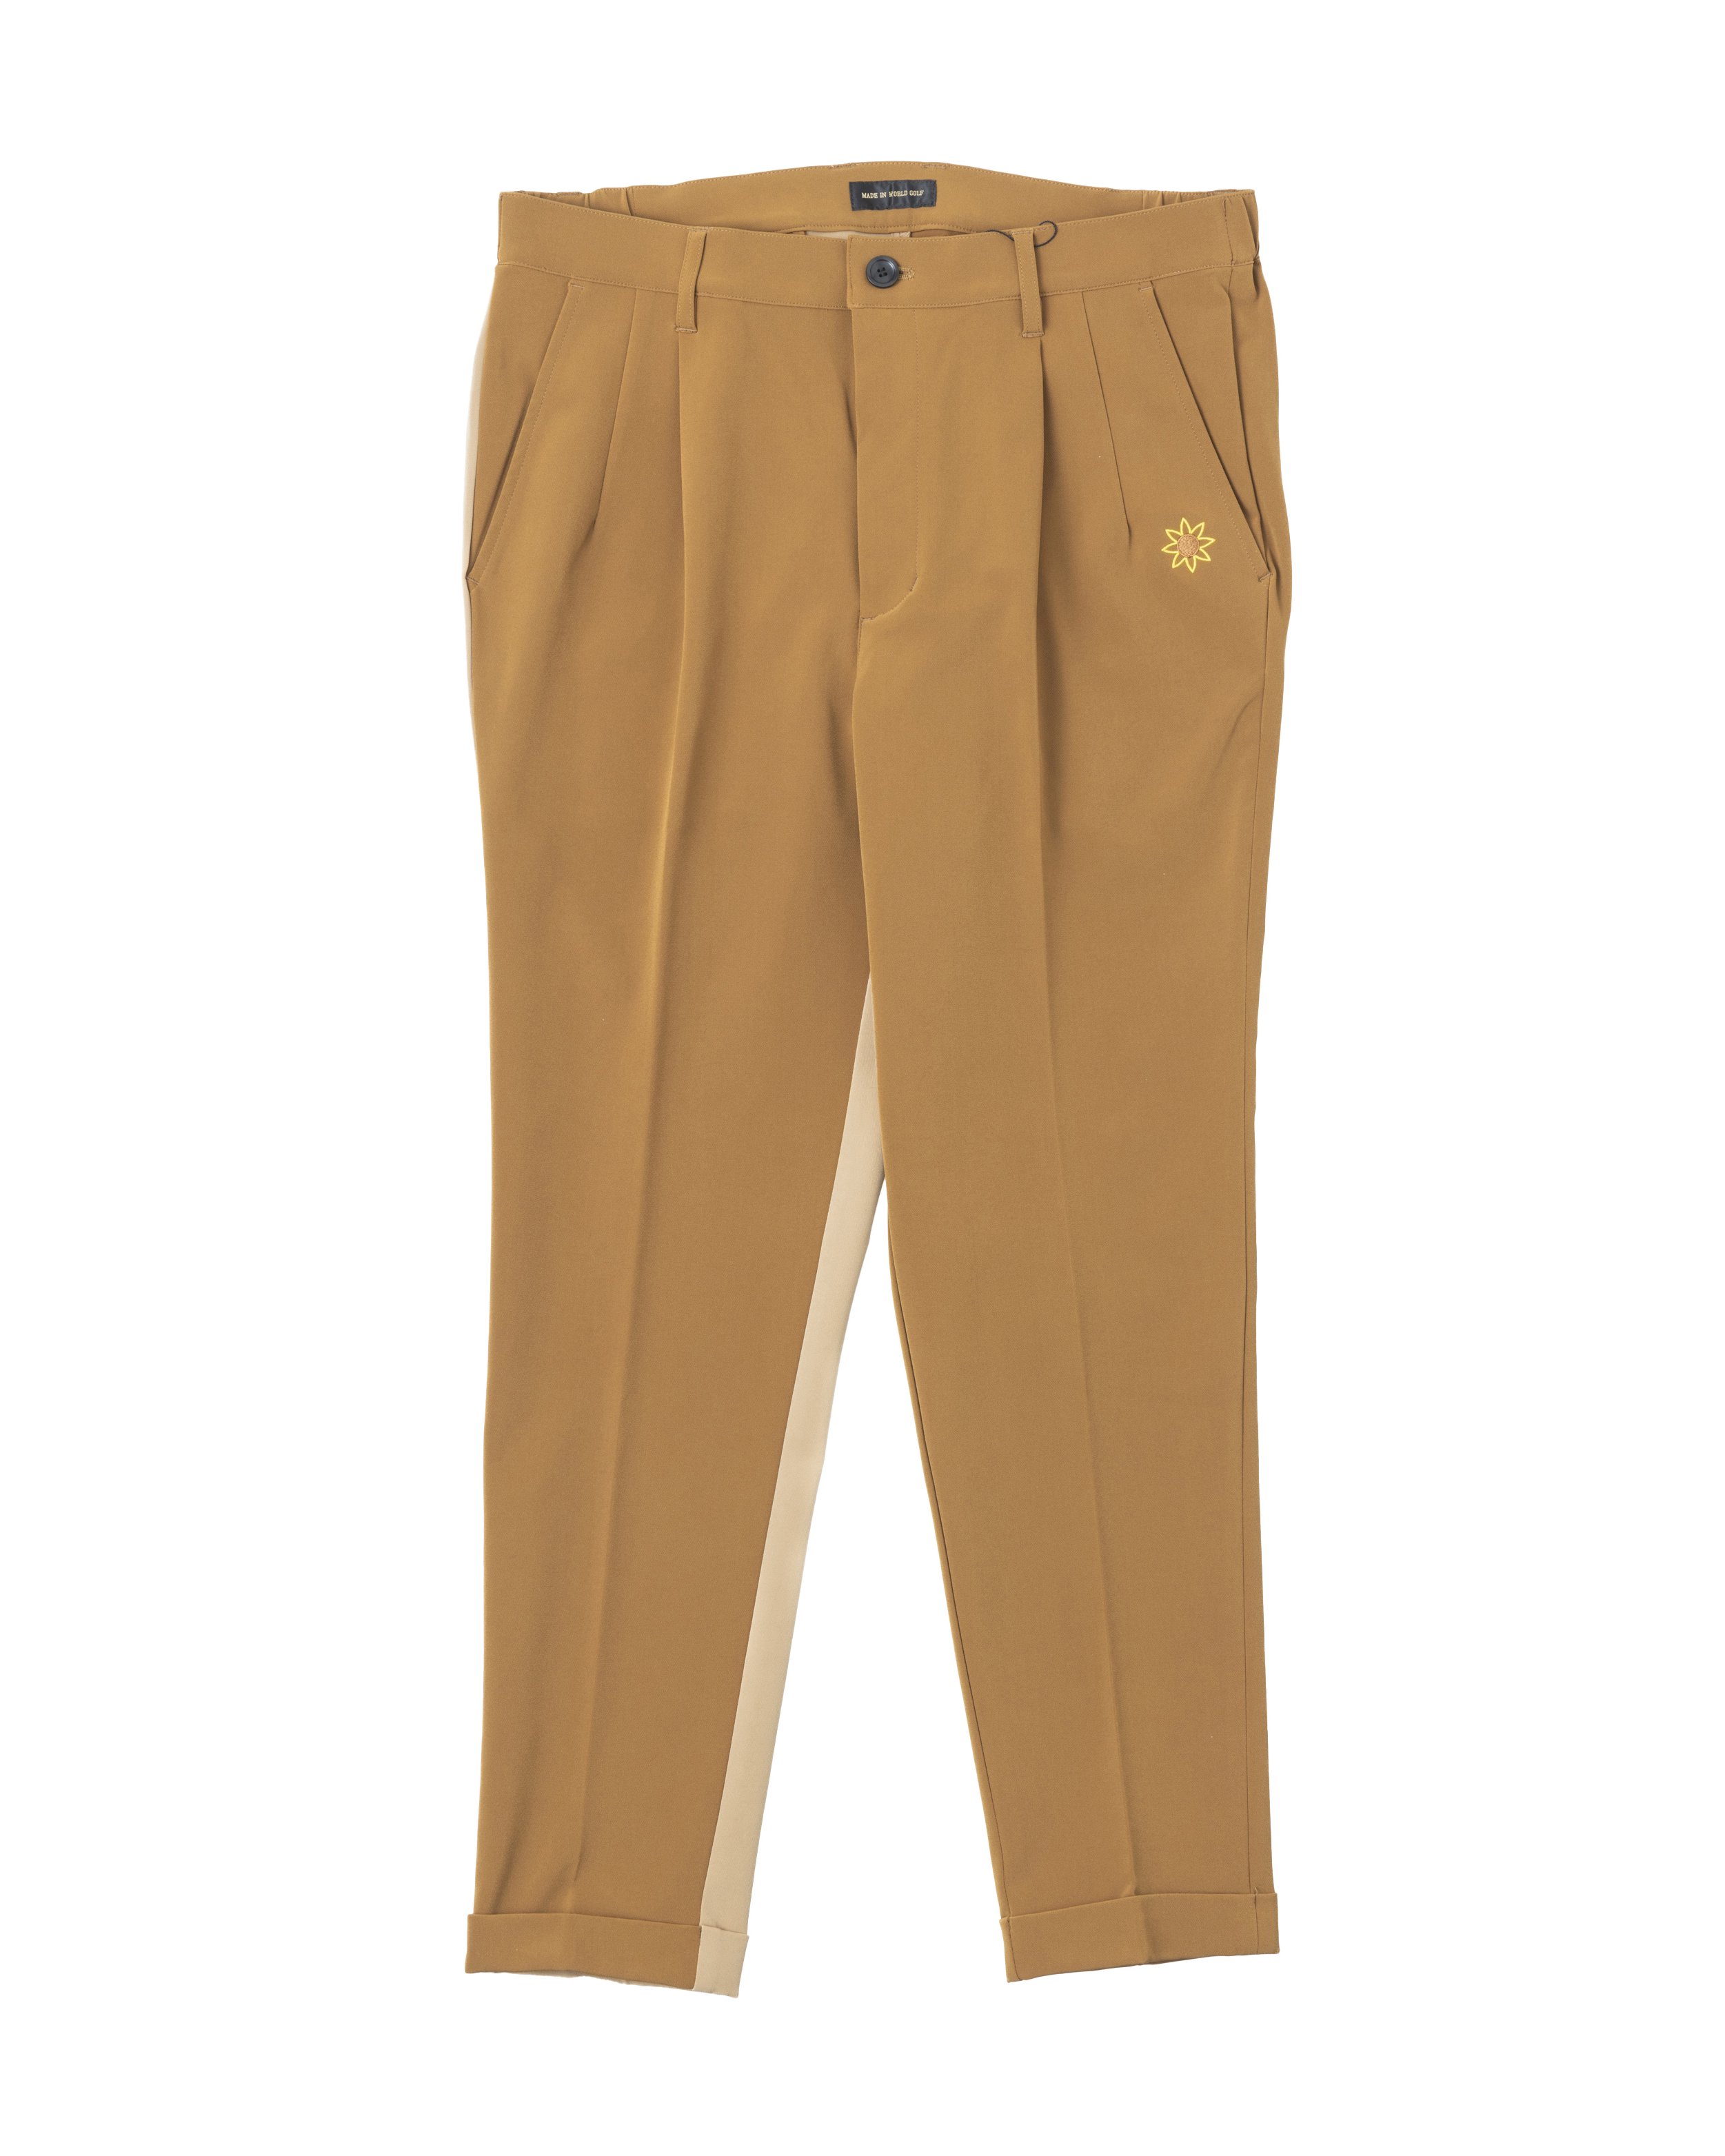 <img class='new_mark_img1' src='https://img.shop-pro.jp/img/new/icons14.gif' style='border:none;display:inline;margin:0px;padding:0px;width:auto;' />TRACK PANTS<br />camel